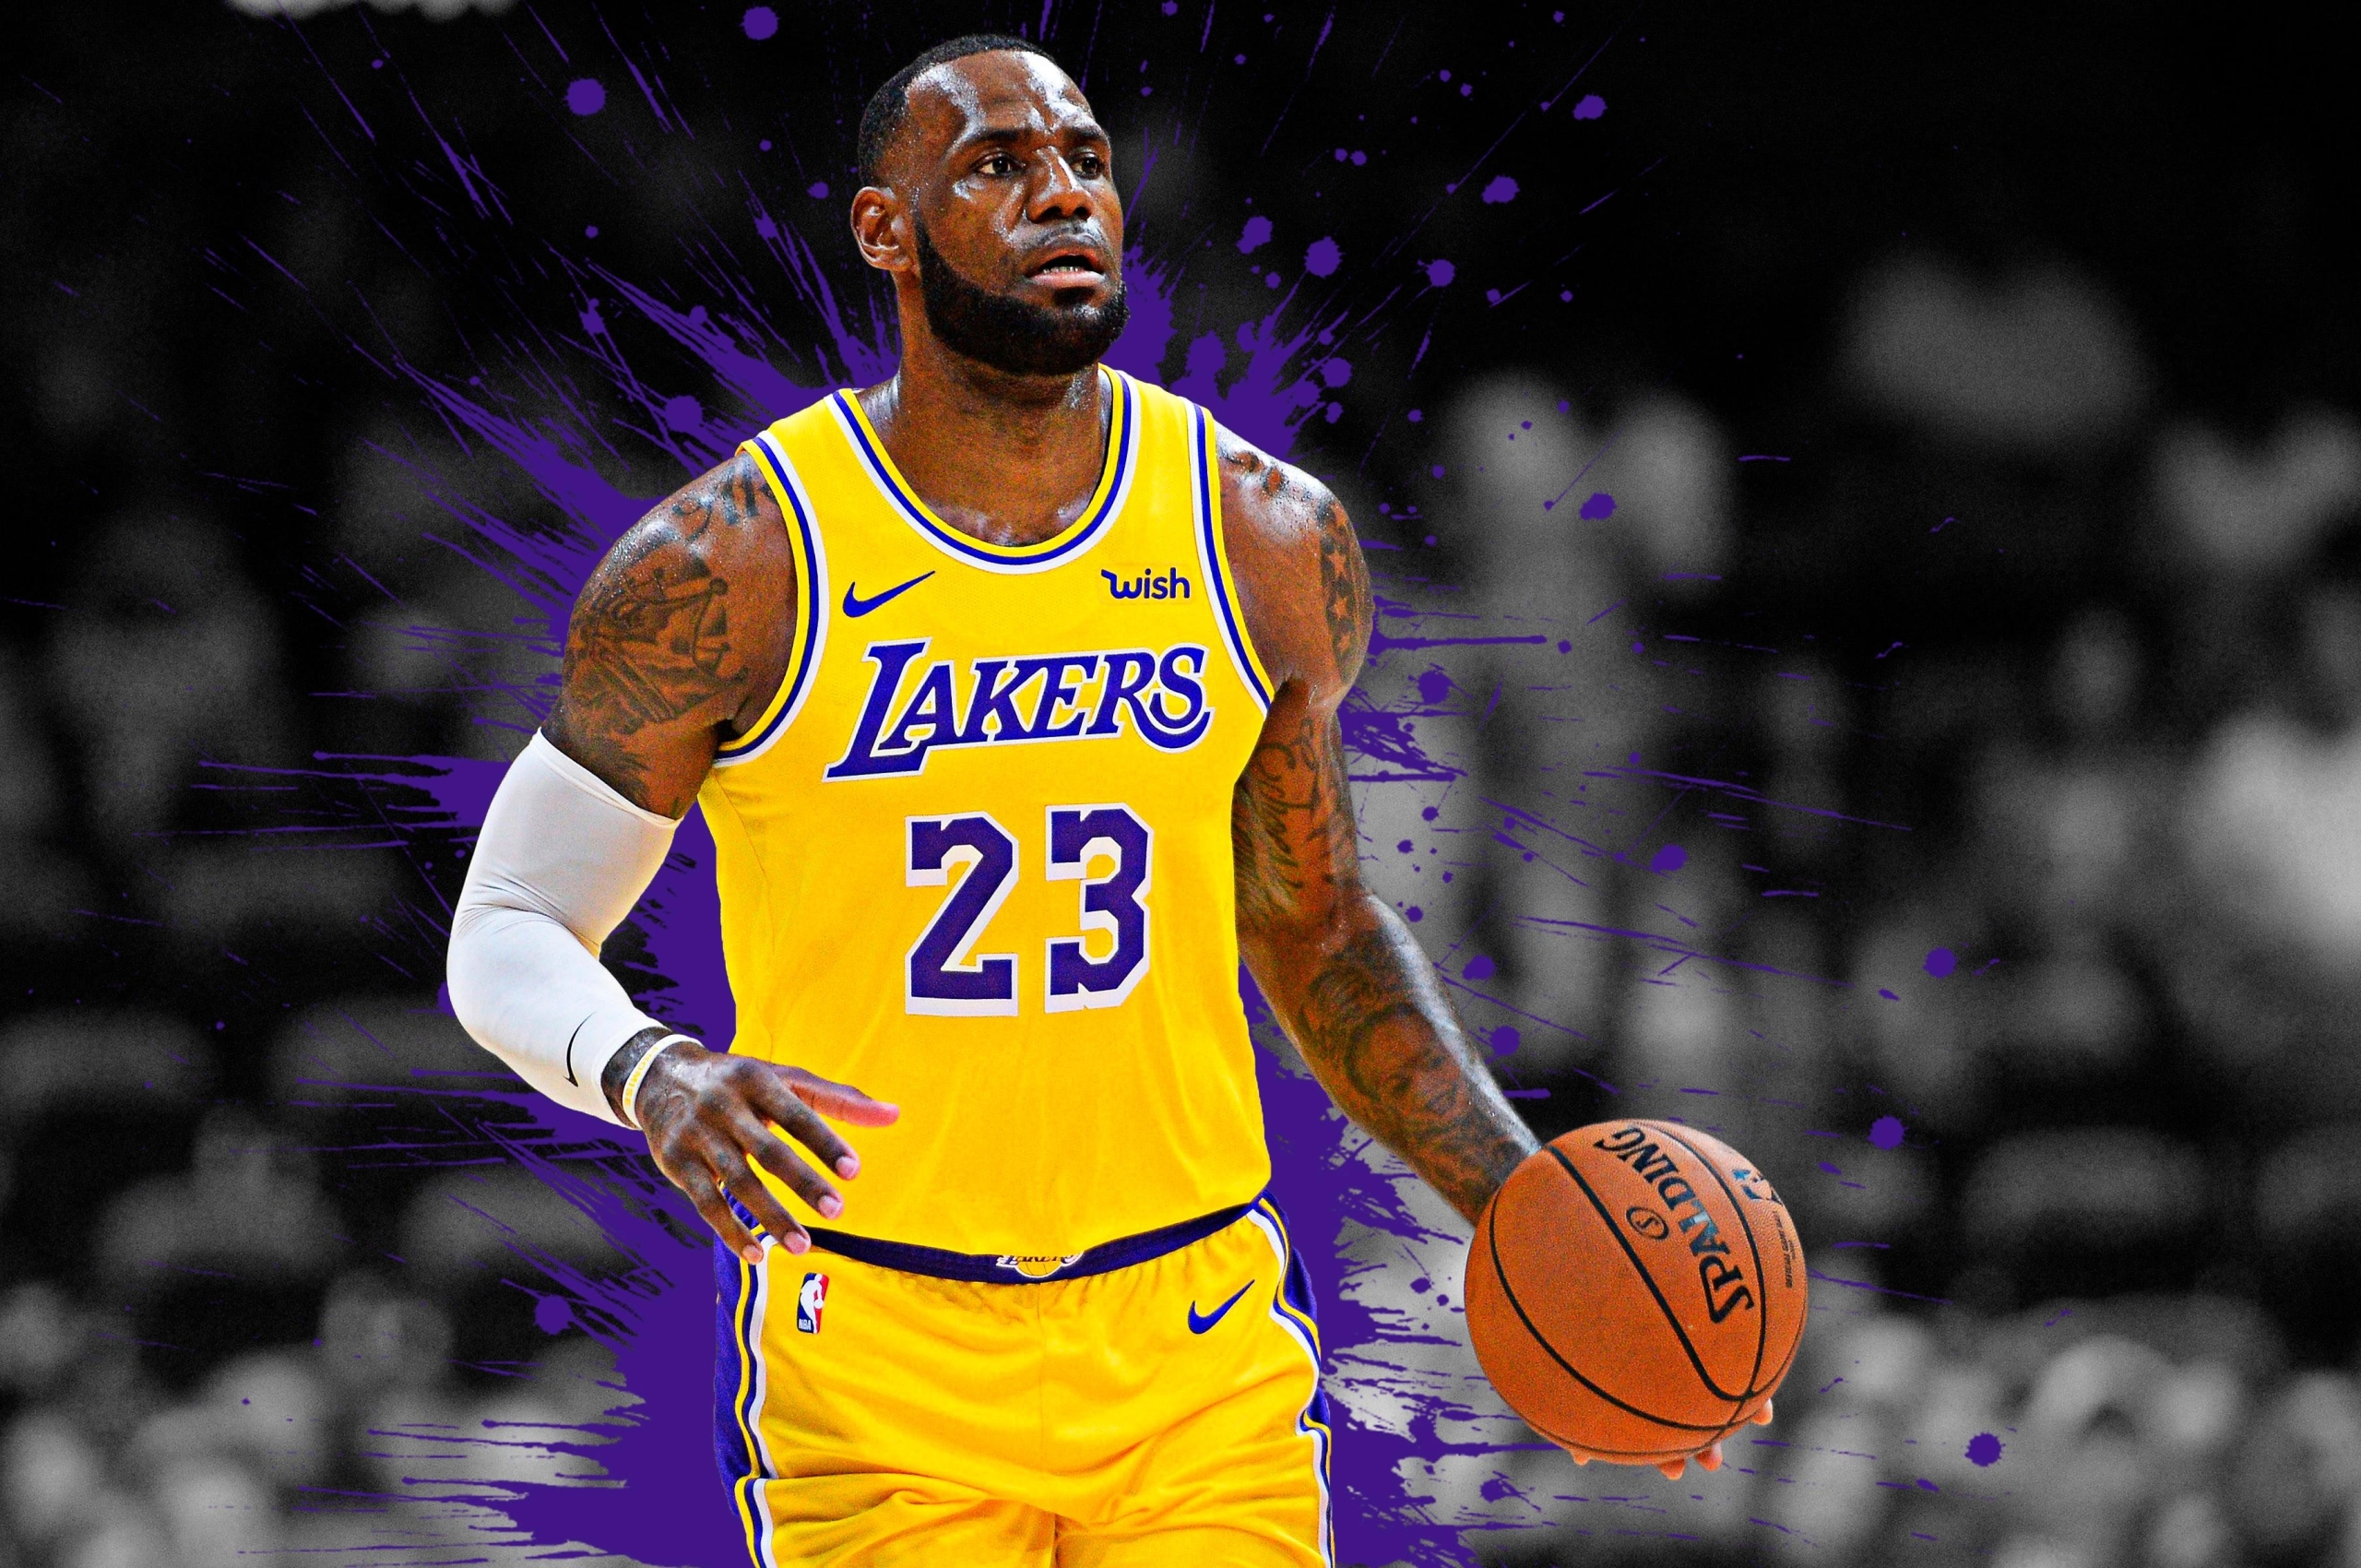 Download Lebron James's All Star season for the Los Angeles Lakers.  Wallpaper | Wallpapers.com